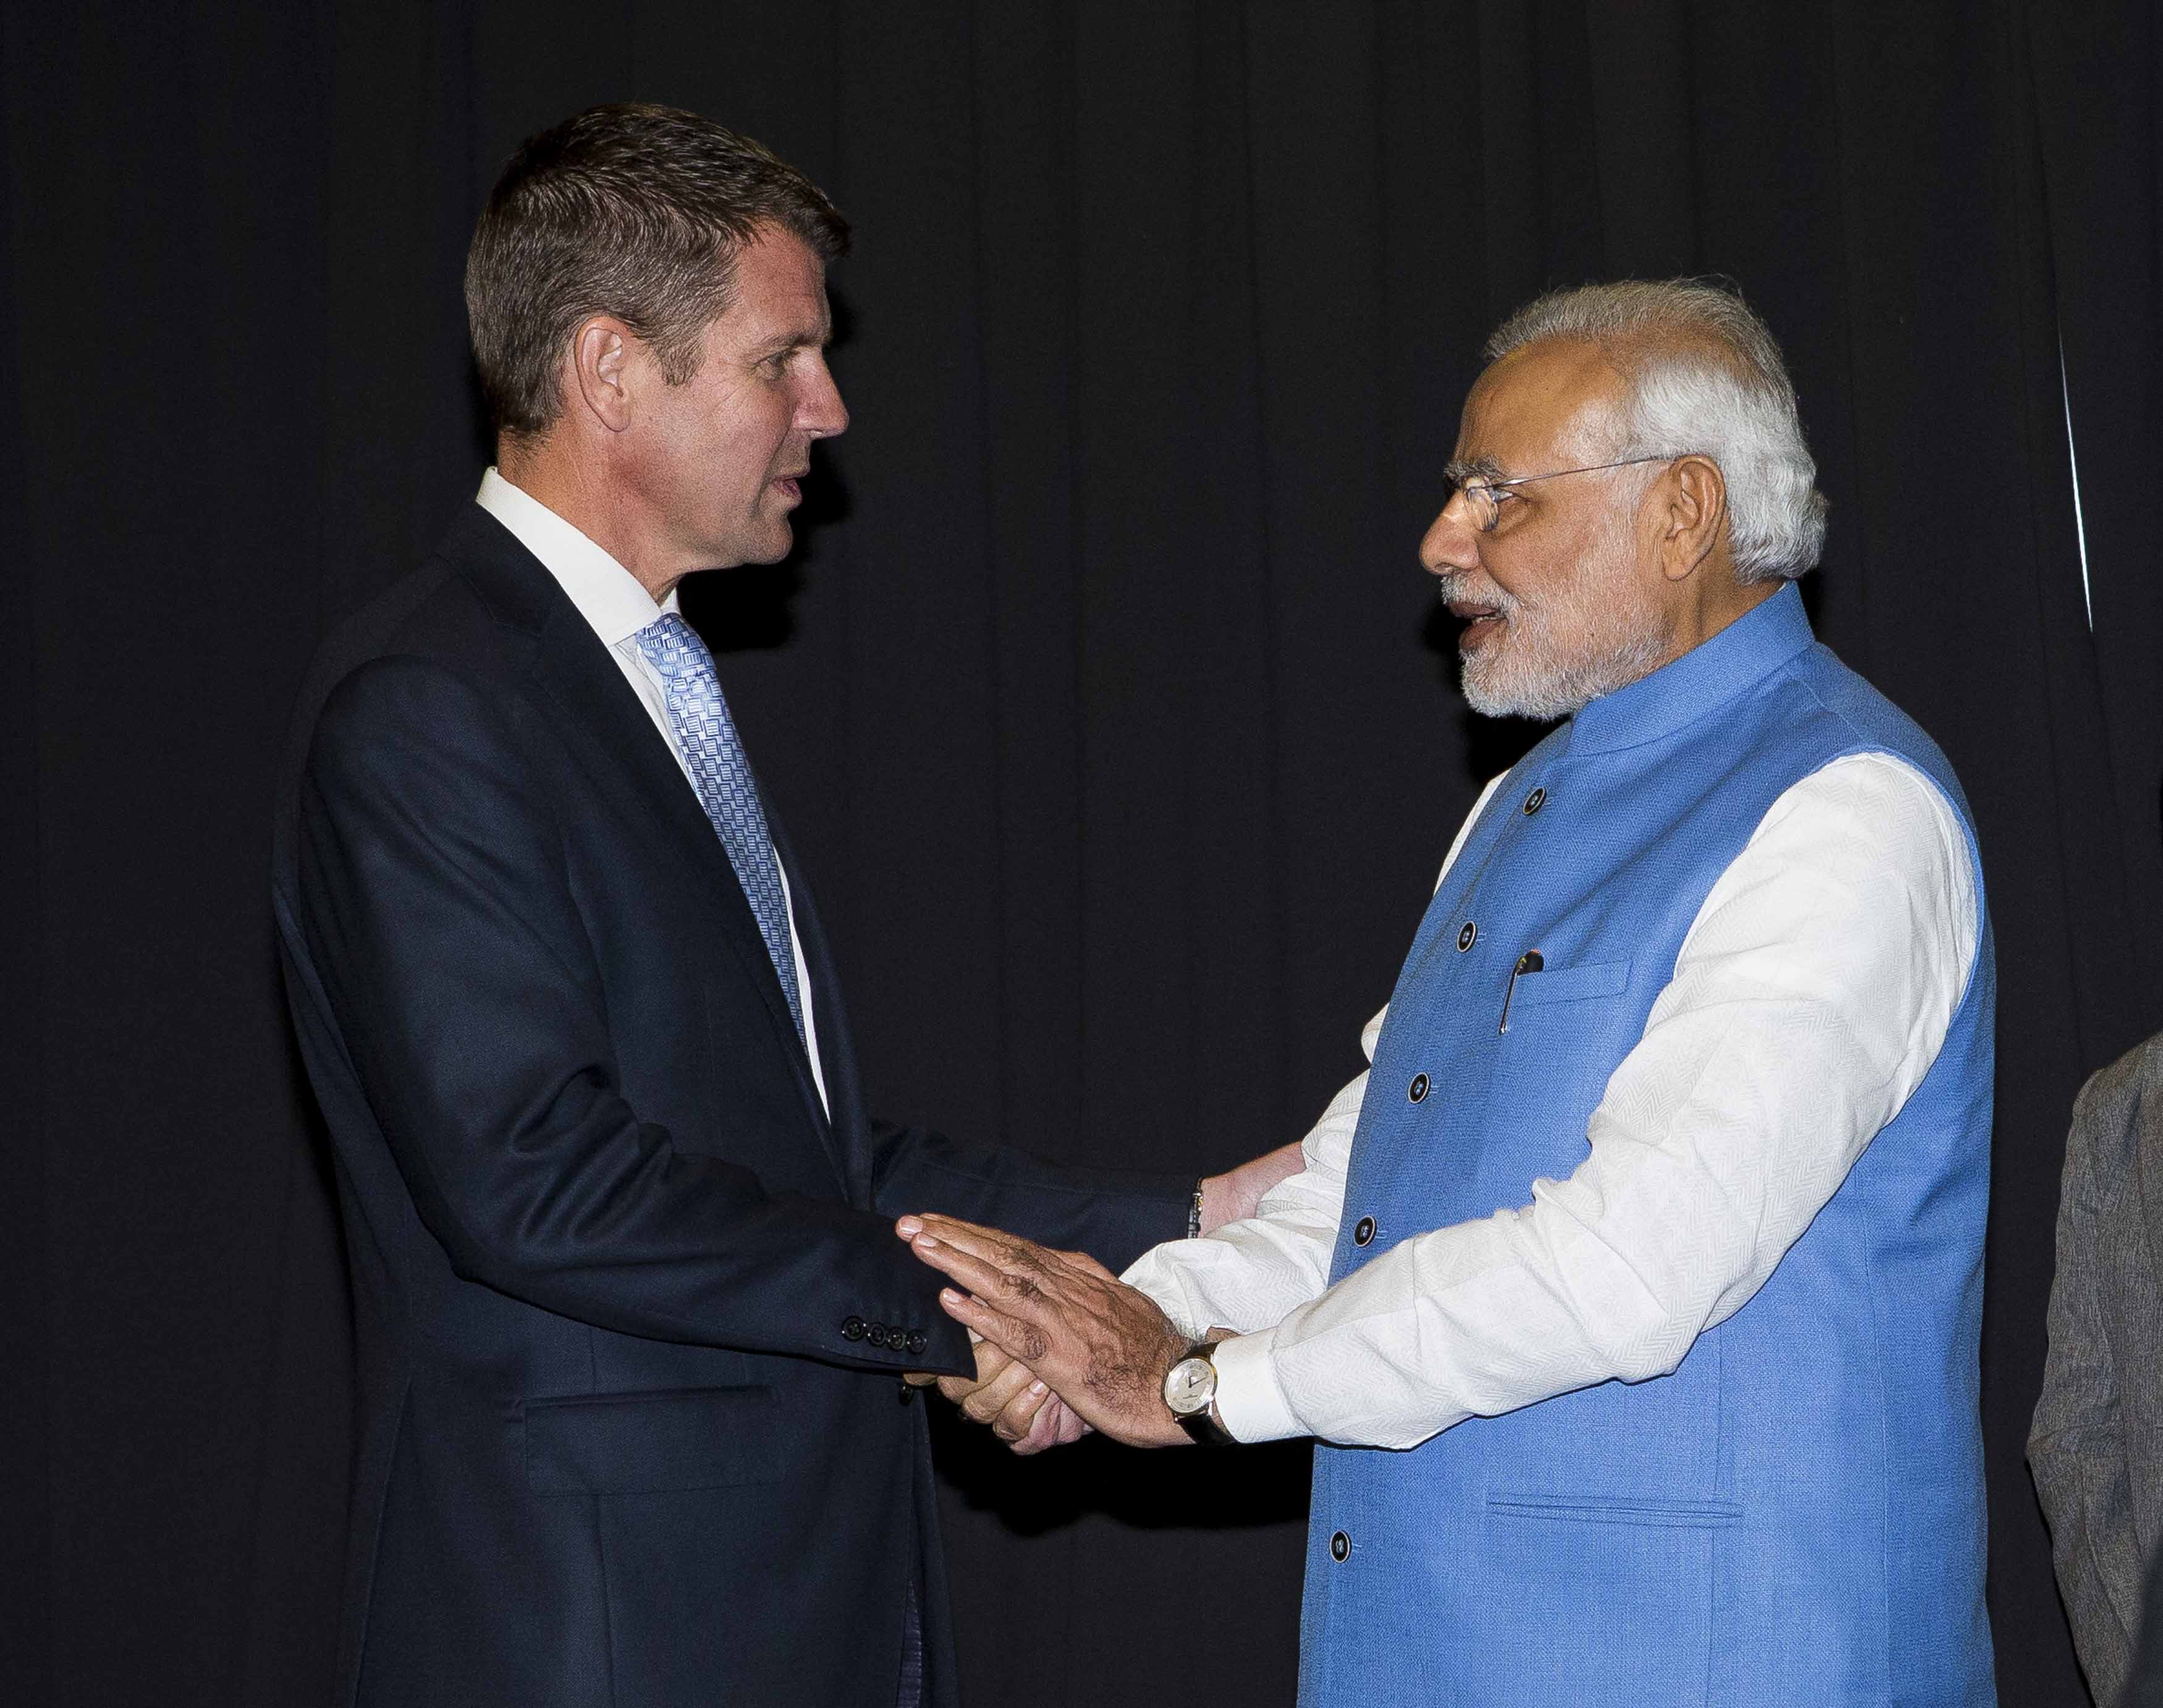 Mr Narendra Modi – Prime Minister of India meeting with The Hon Mike Baird, NSW 2014